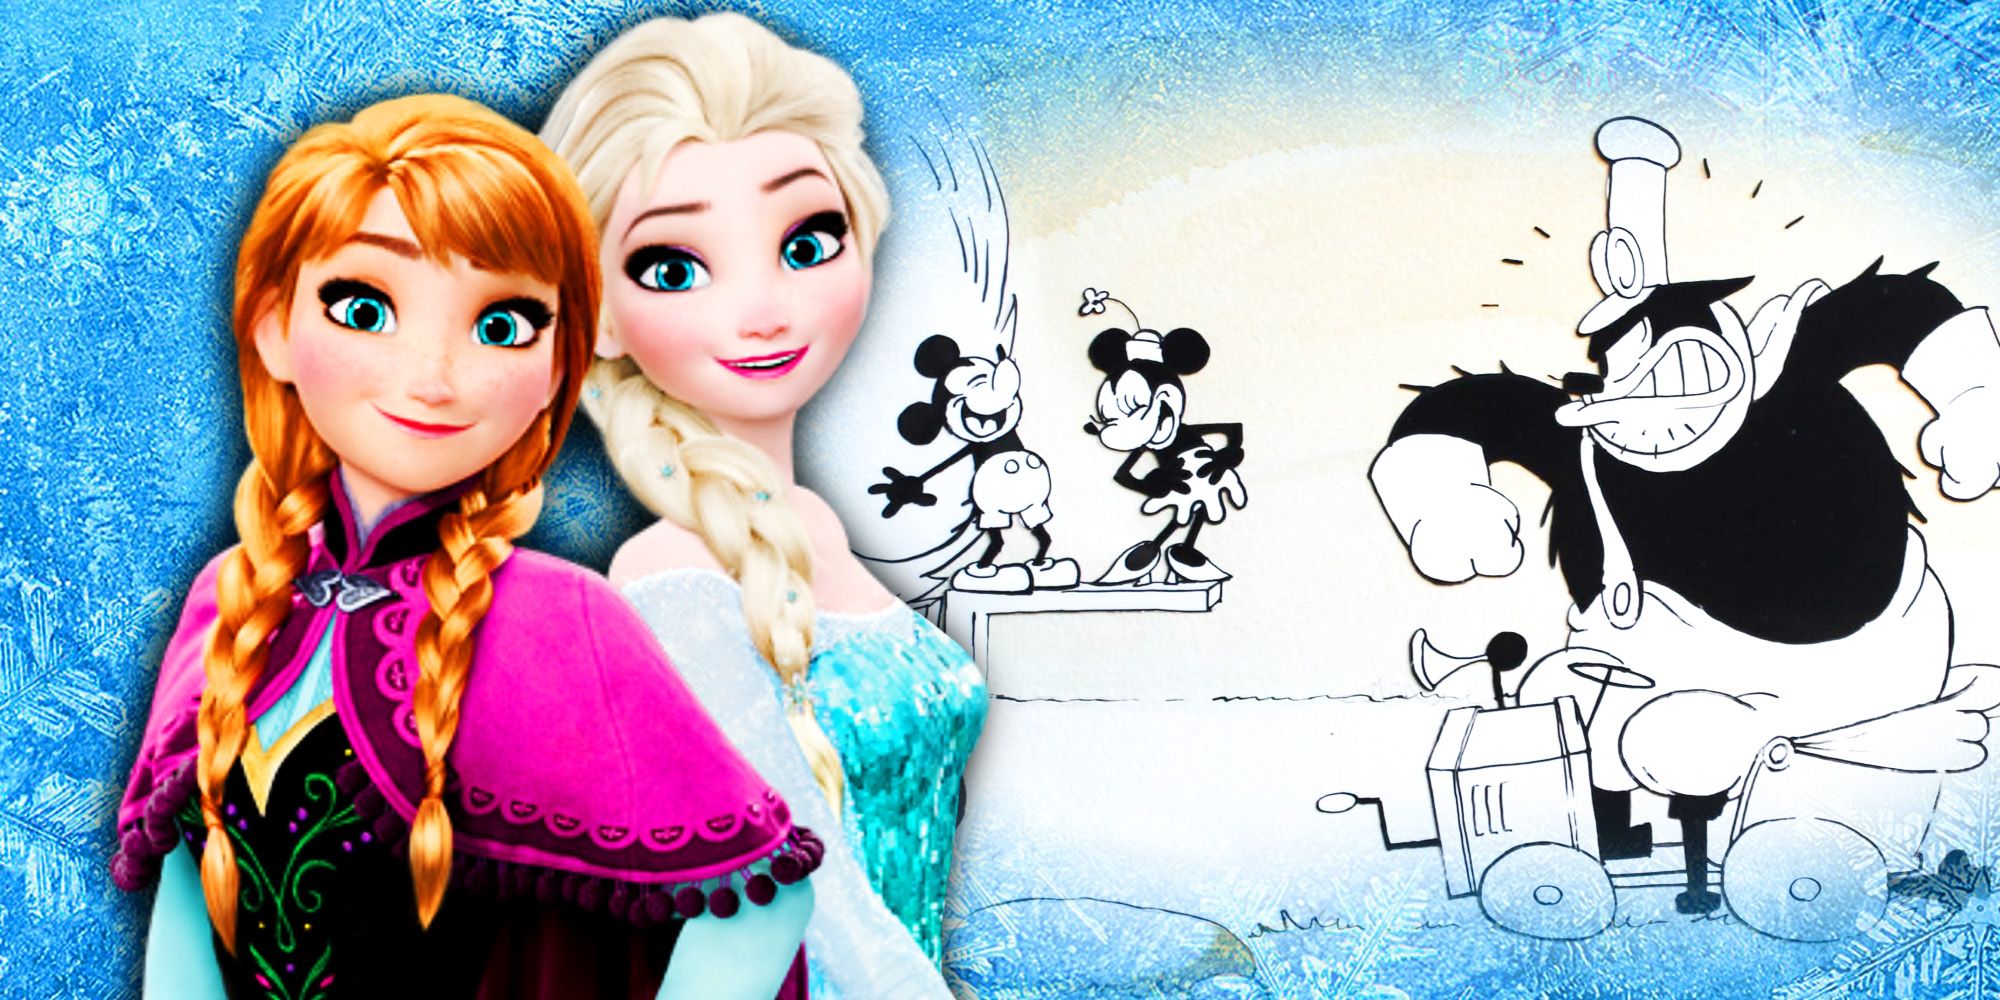 A custom image featuring Anna and Elsa in Frozen and a scene from Mickey Mouse's Get A Horse